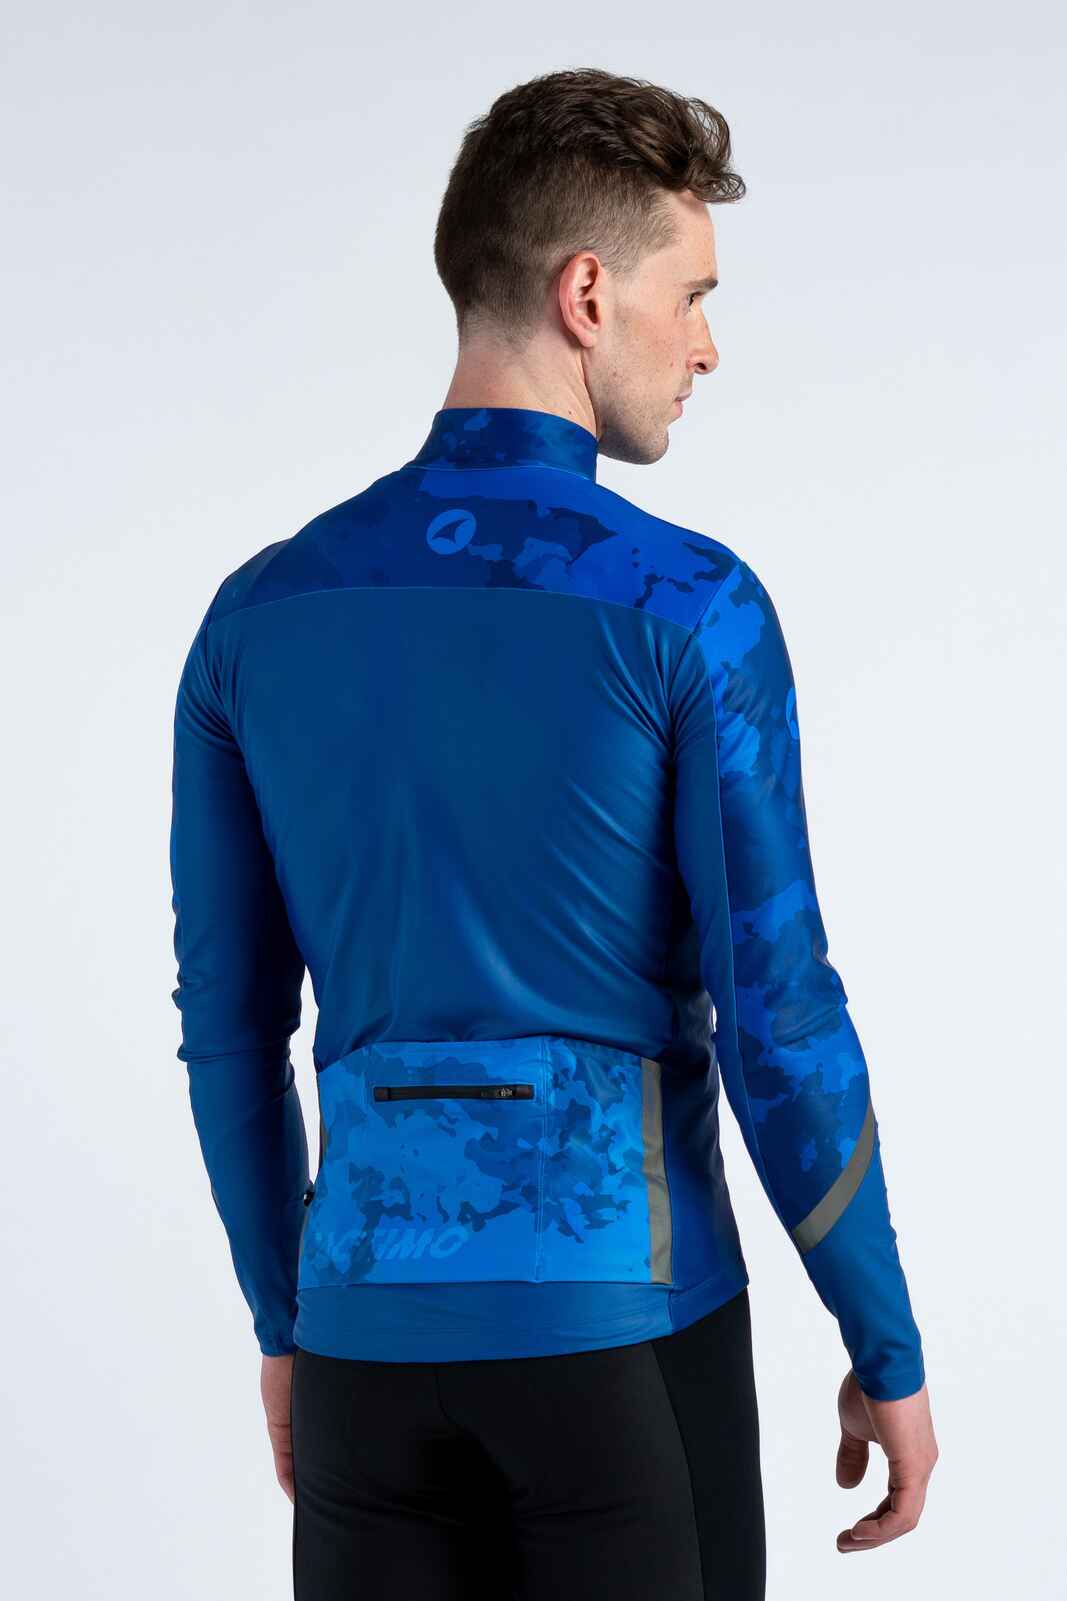 Men's Blue Camo Thermal Long Sleeve Cycling Jersey - Back View